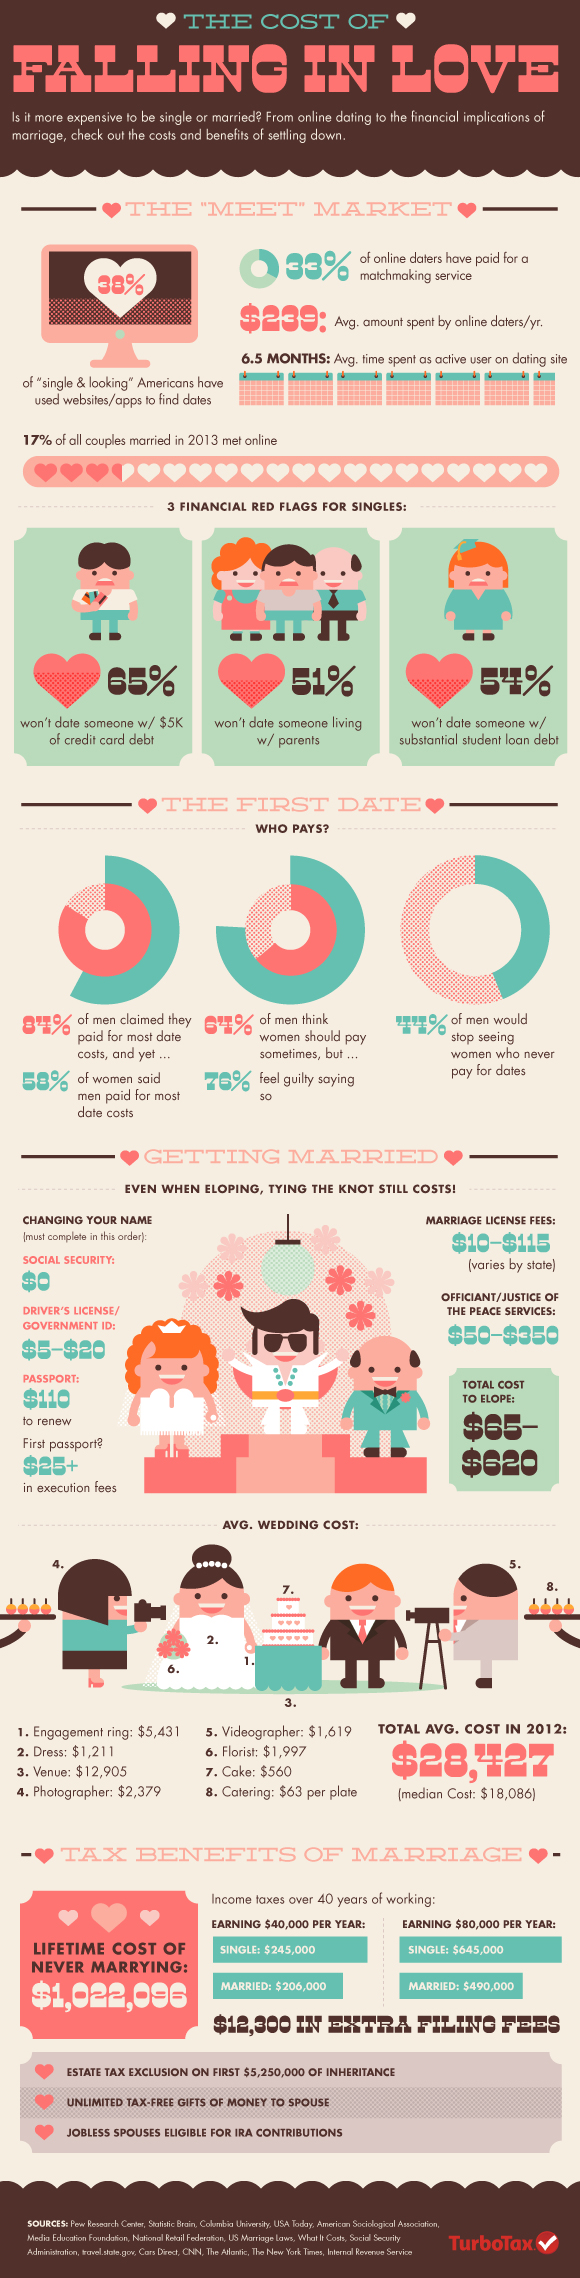 The Cost of Falling in Love (Infographic)